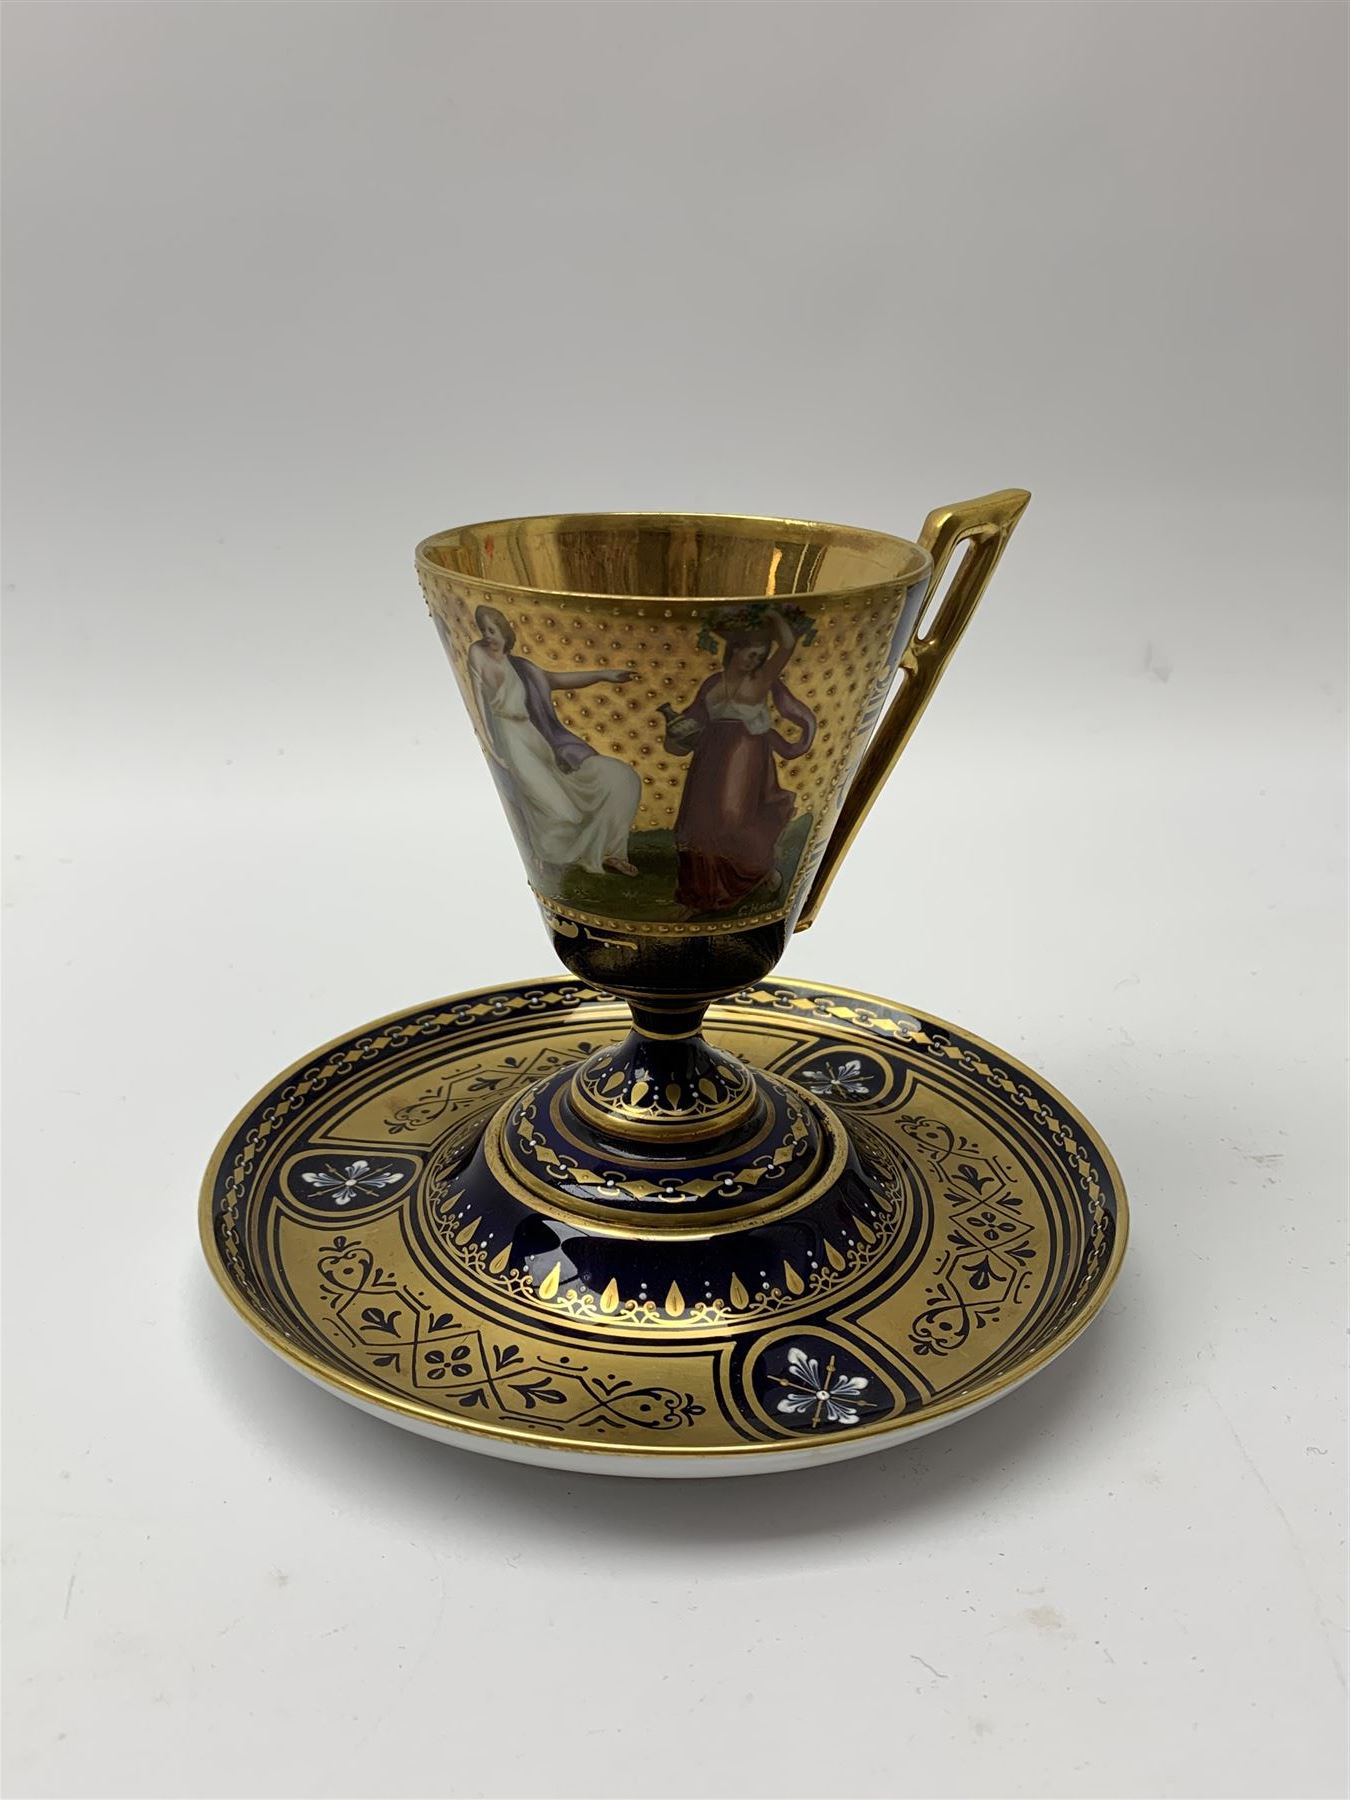 Vienna cabinet cup and saucer - Image 6 of 9